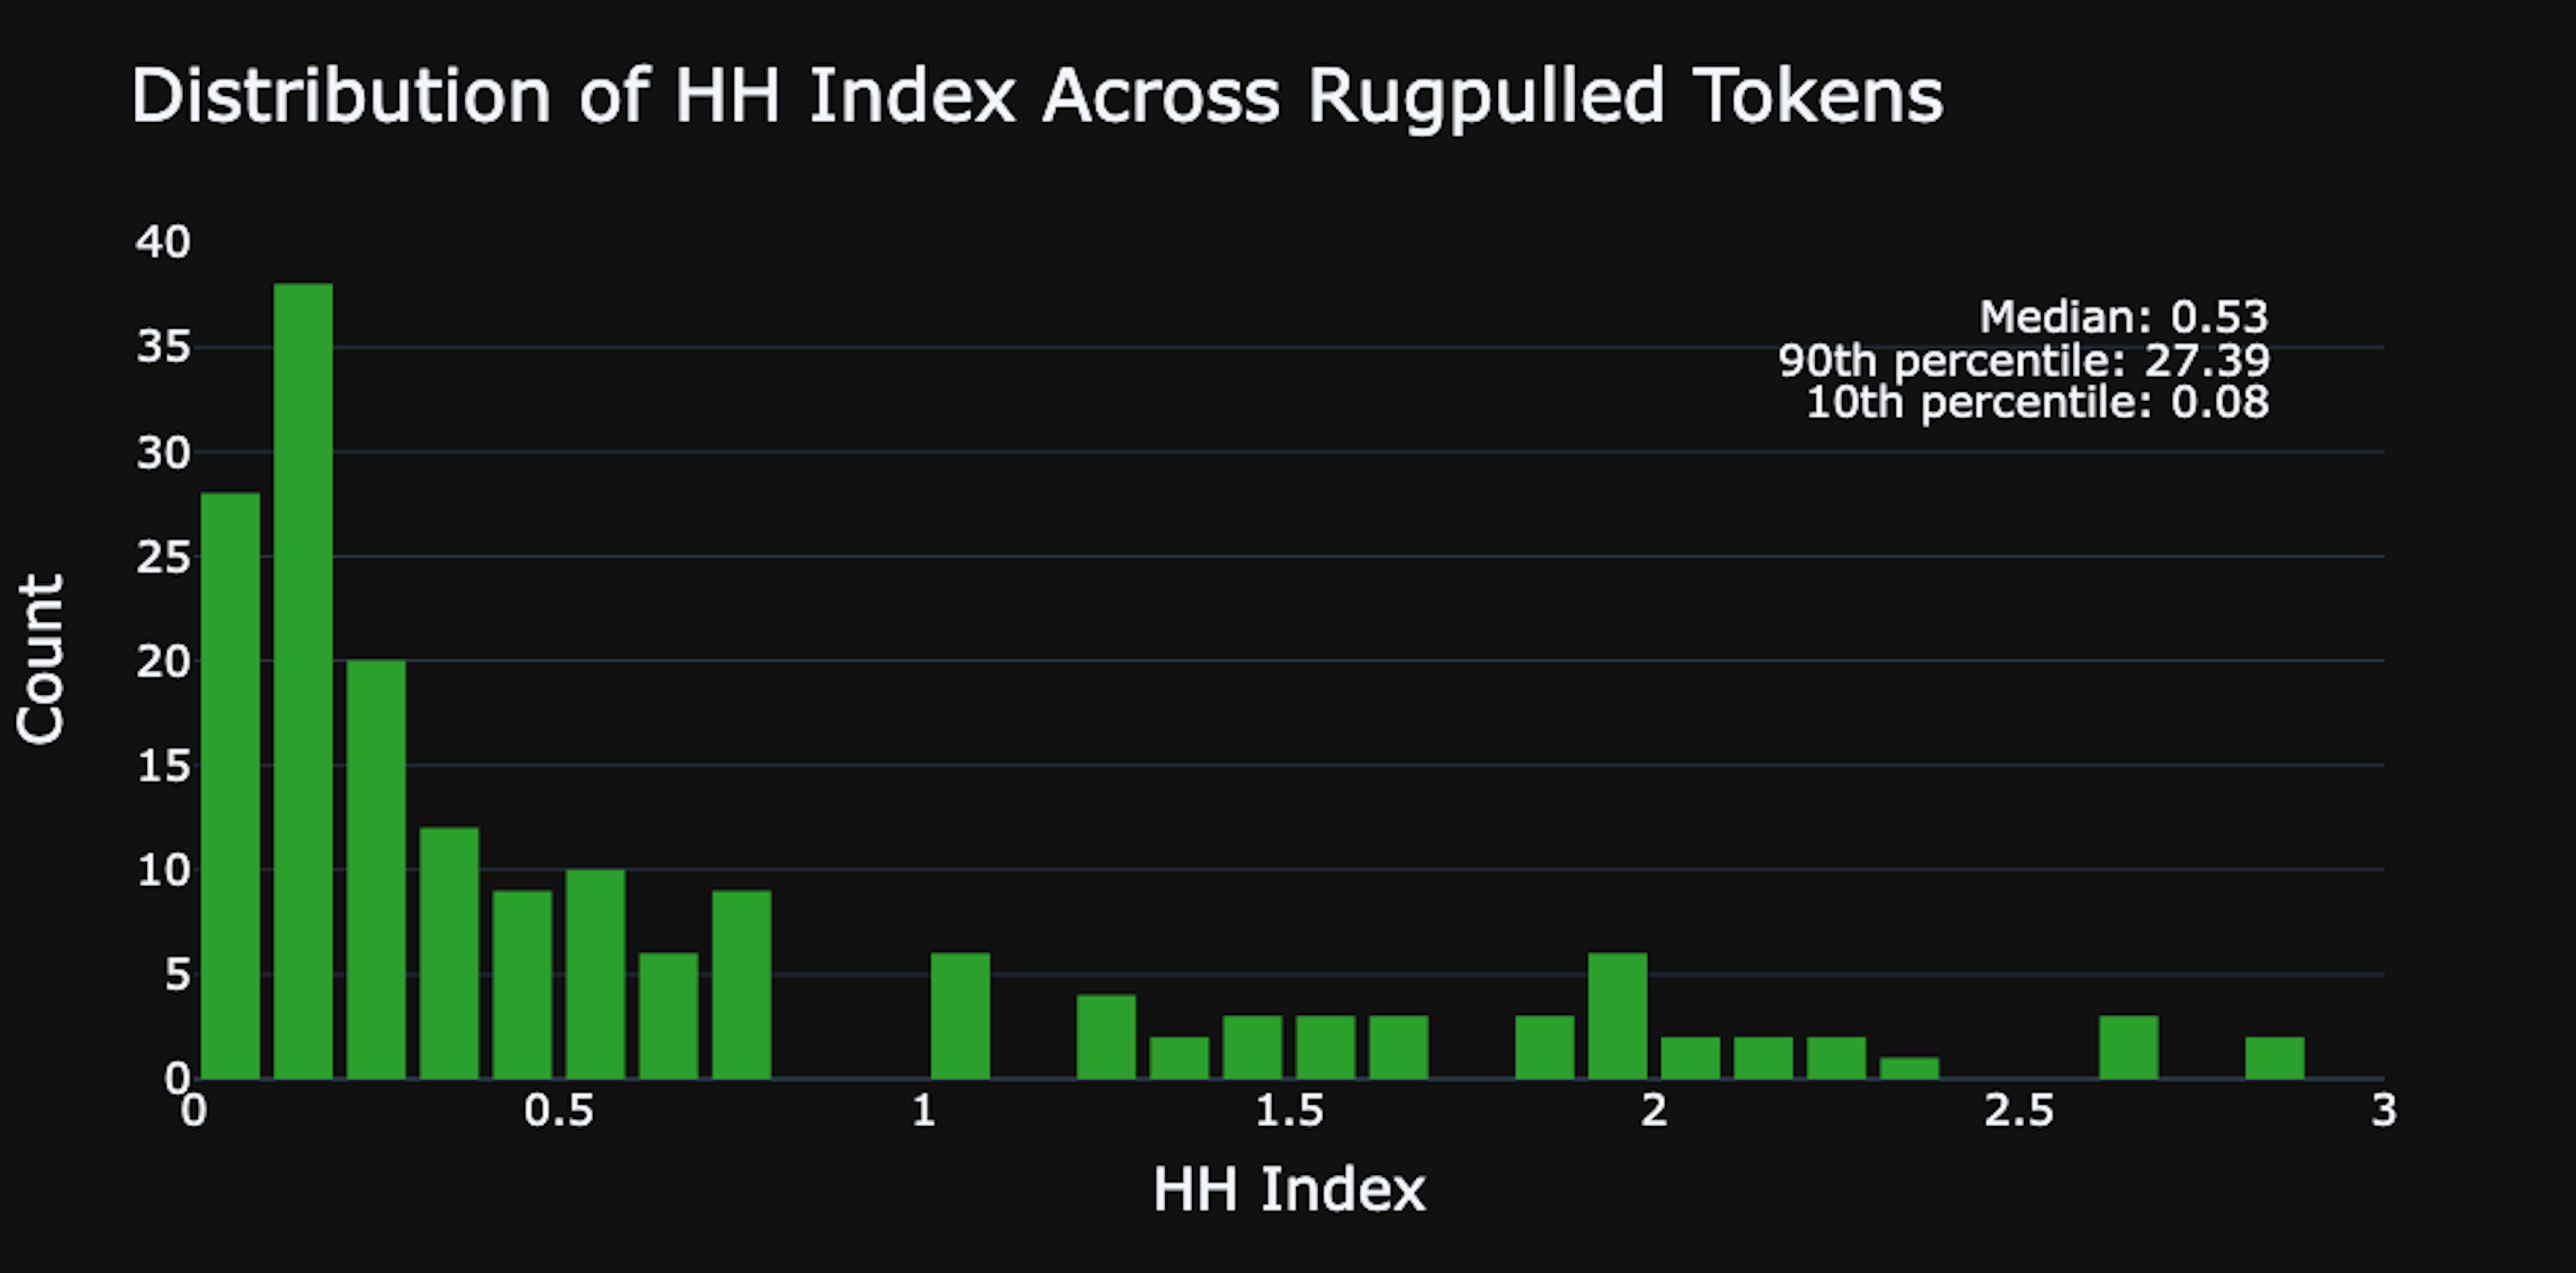 HHI Distribution Across Rug pulled Tokens